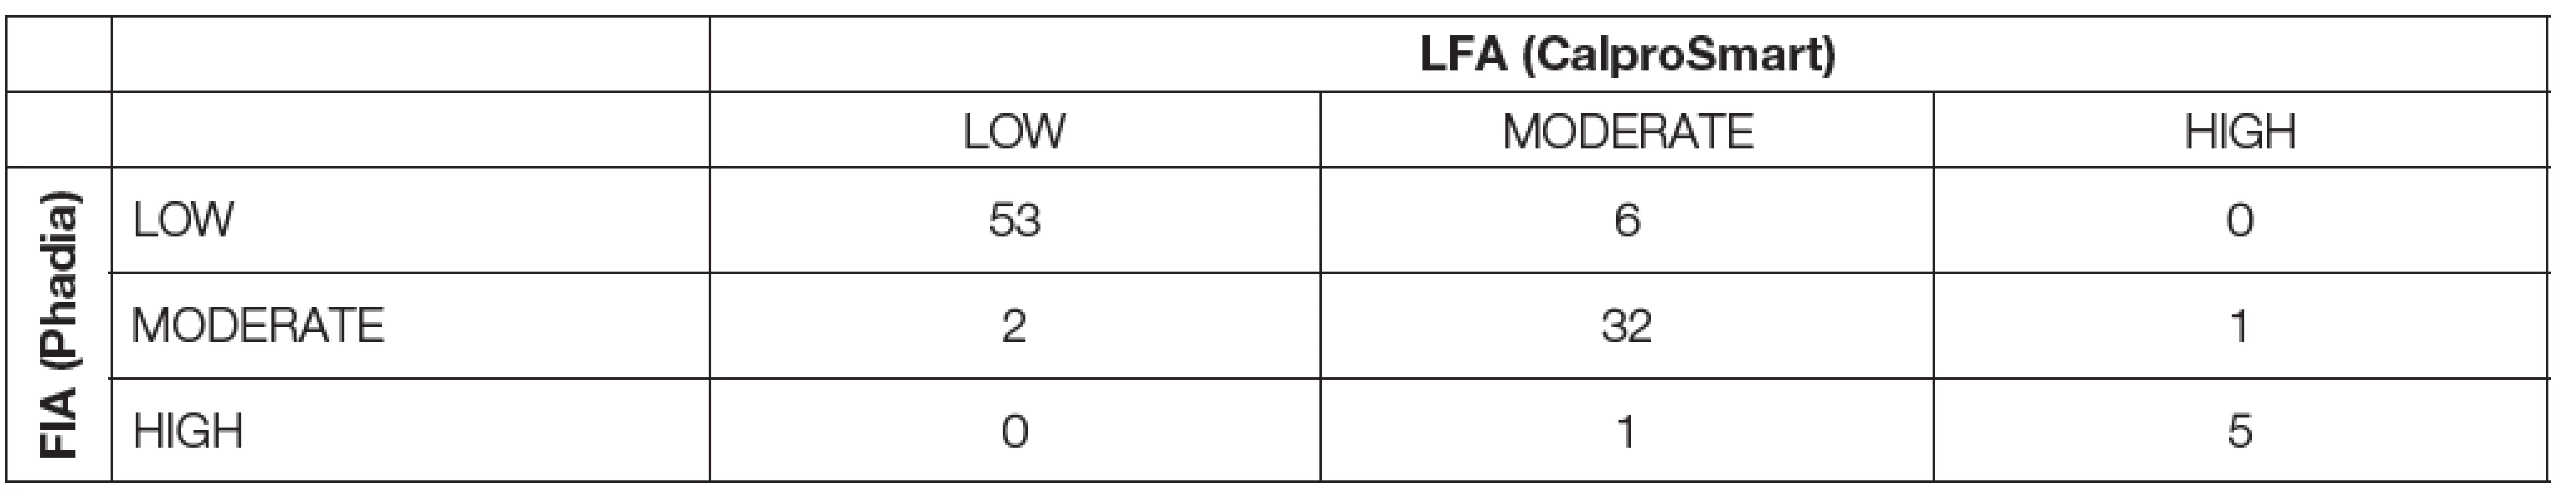 LFA and FIA performance results in terms of Cohen’s kappa coefficient